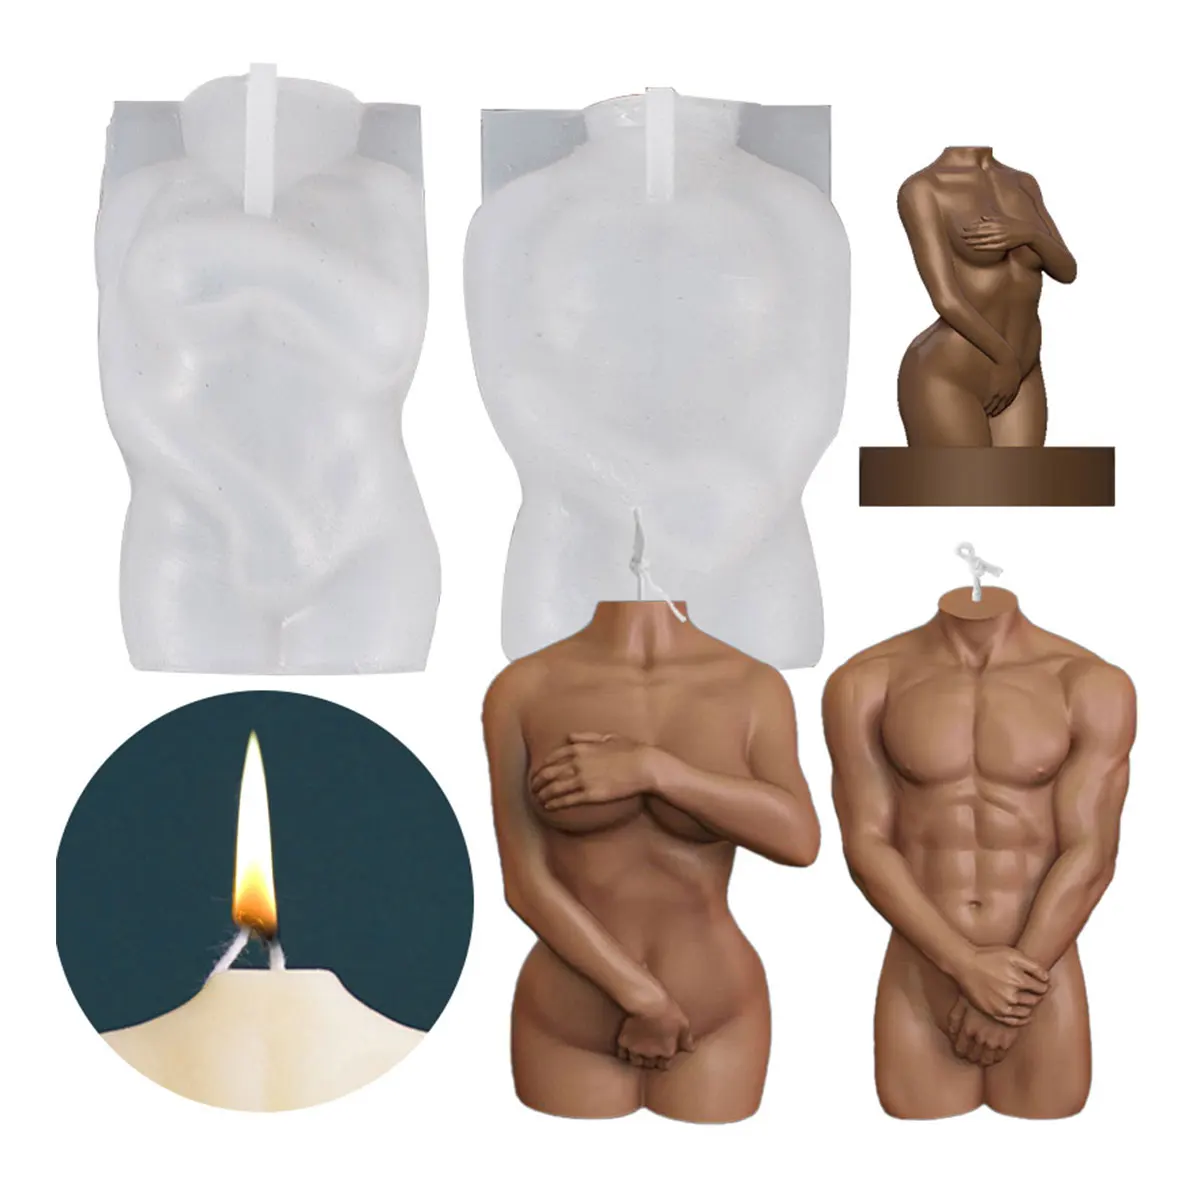 

Candle Mold Body Silicone Molds Shy Man Shy Woman Candle Making Reusable Candle Make Mold DIY Epoxy Resin Craft Moule Bougie